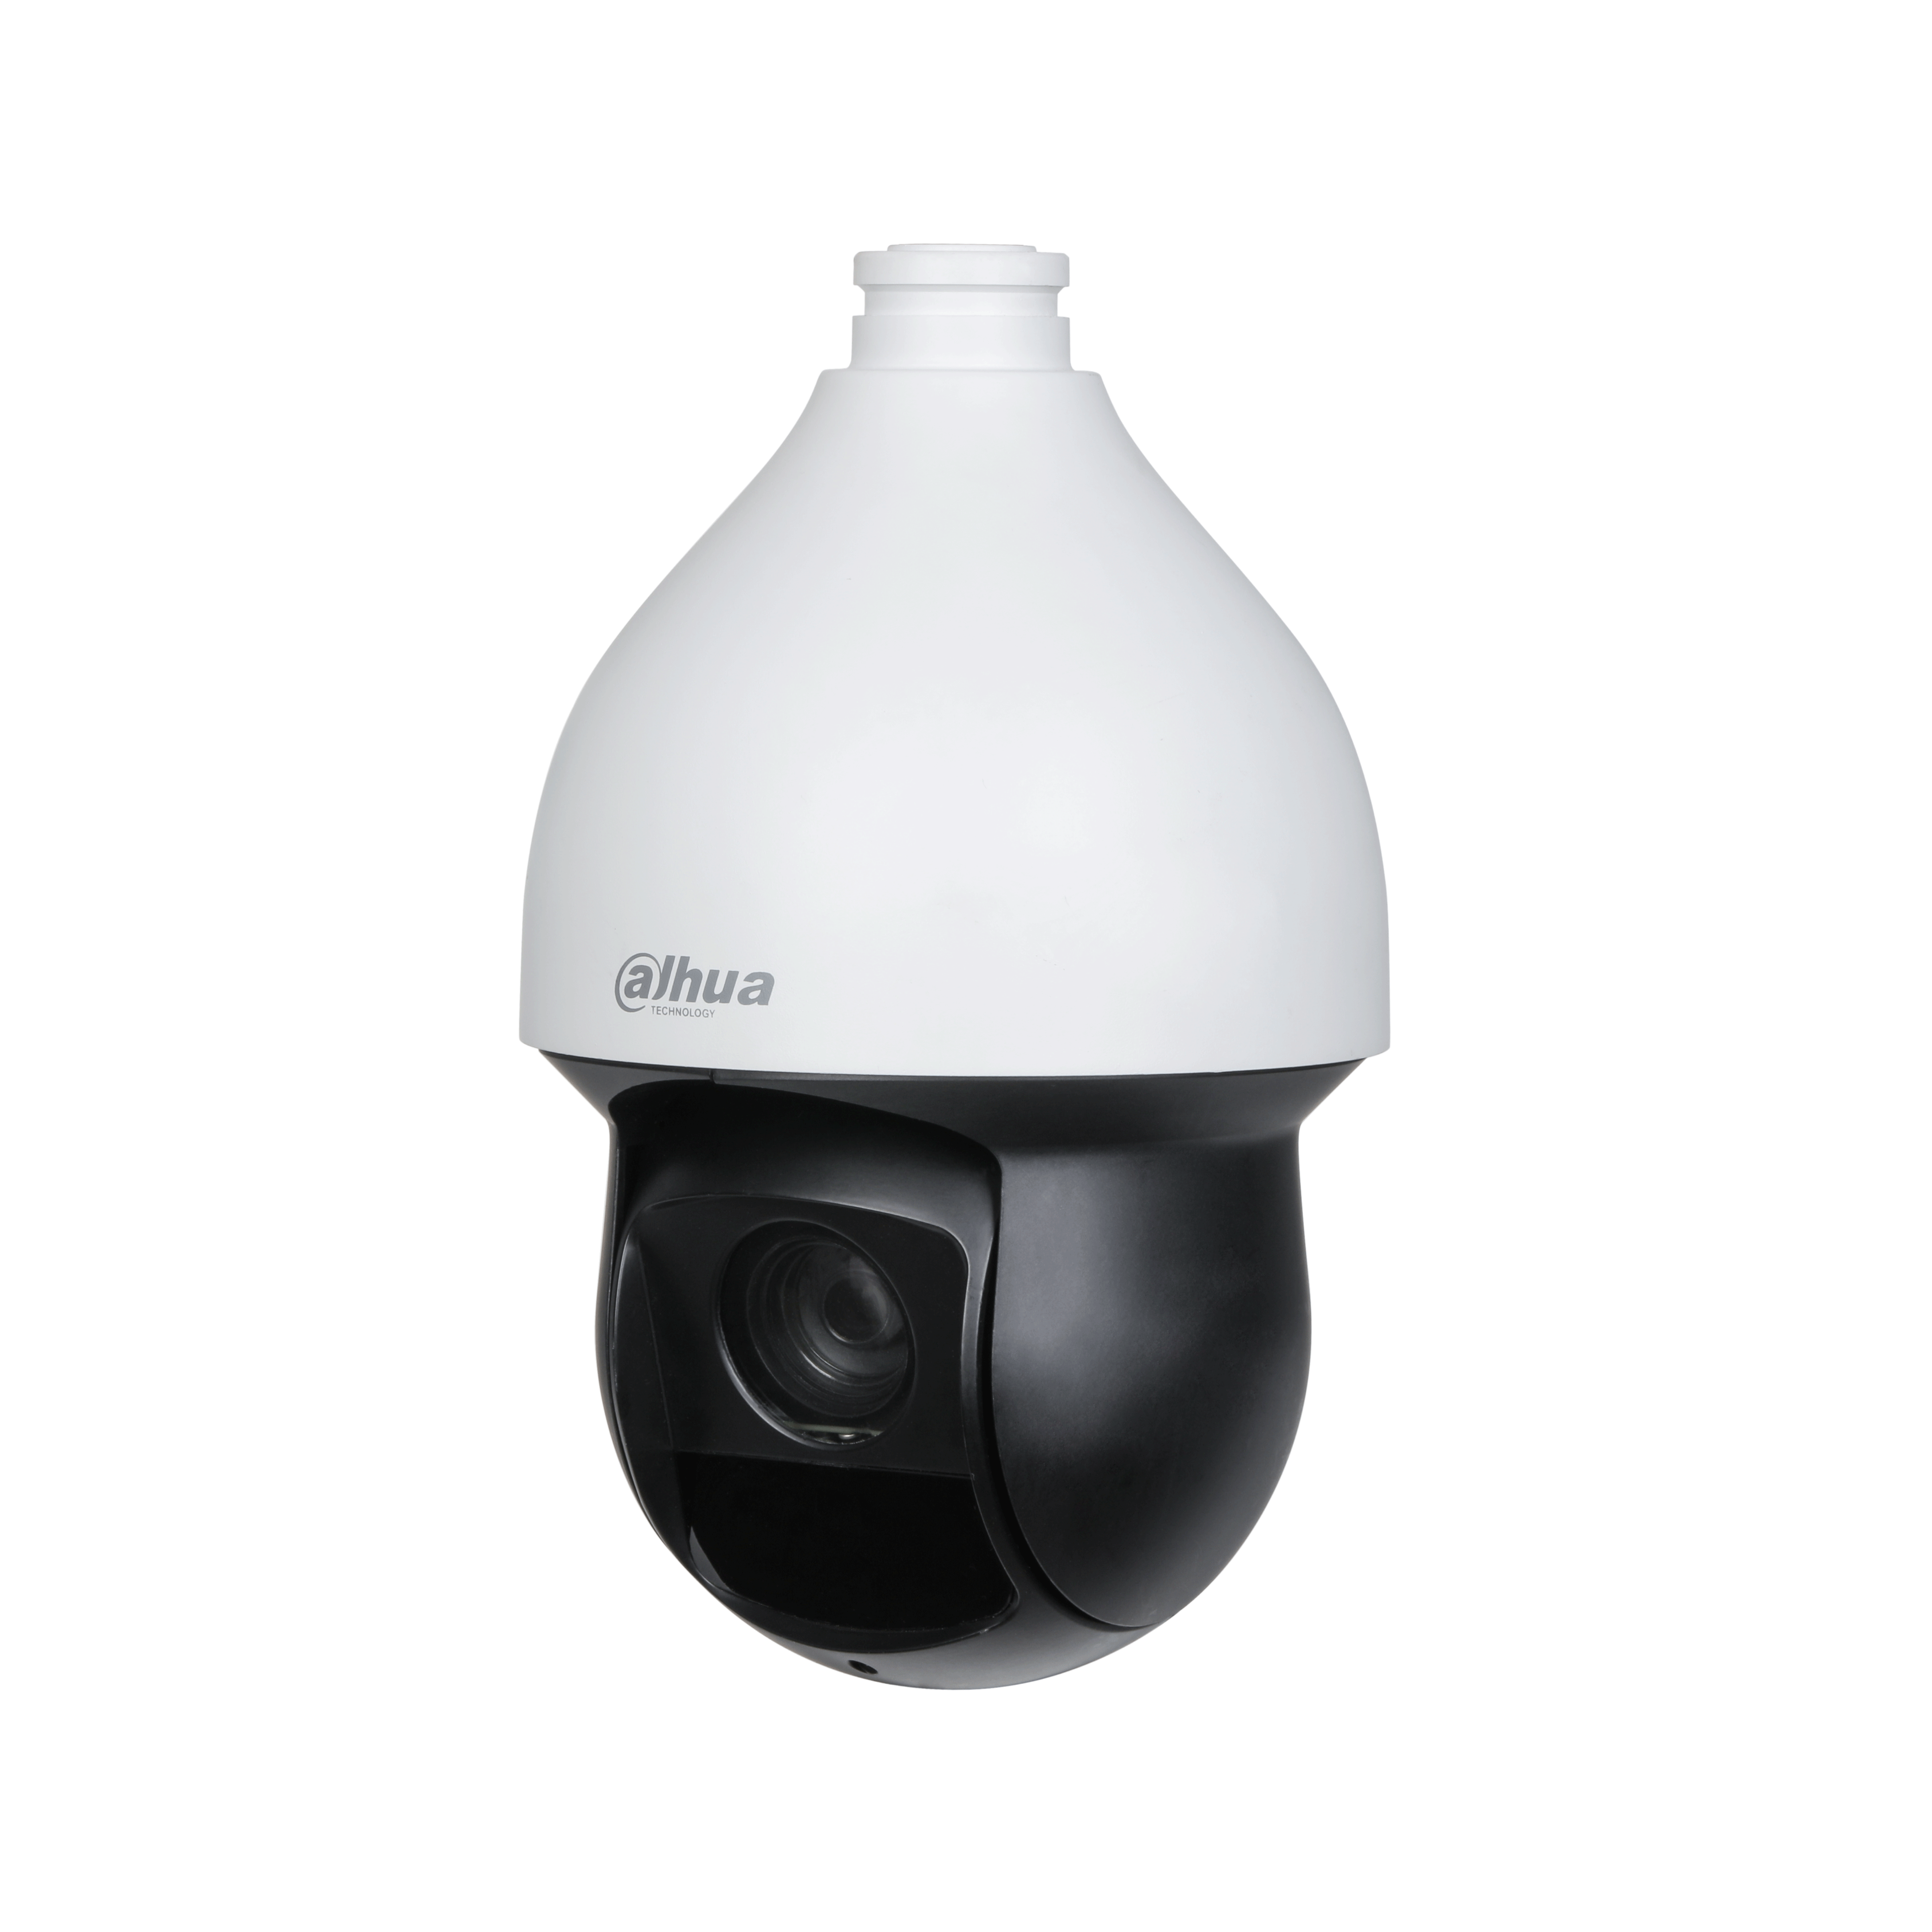 HDCVI SERIES HDCVI CAMERA WHITE 2MP/1080P SPEED DOME PTZ 120 WDR METAL 4.8-120MMMOTORISED LENS 25X ZOOM STARLIGHT IR 150M IP66 WITHOUT MIC AUDIO IN NO-SD CARD SLOT 24VDC CVBS OUTPUT